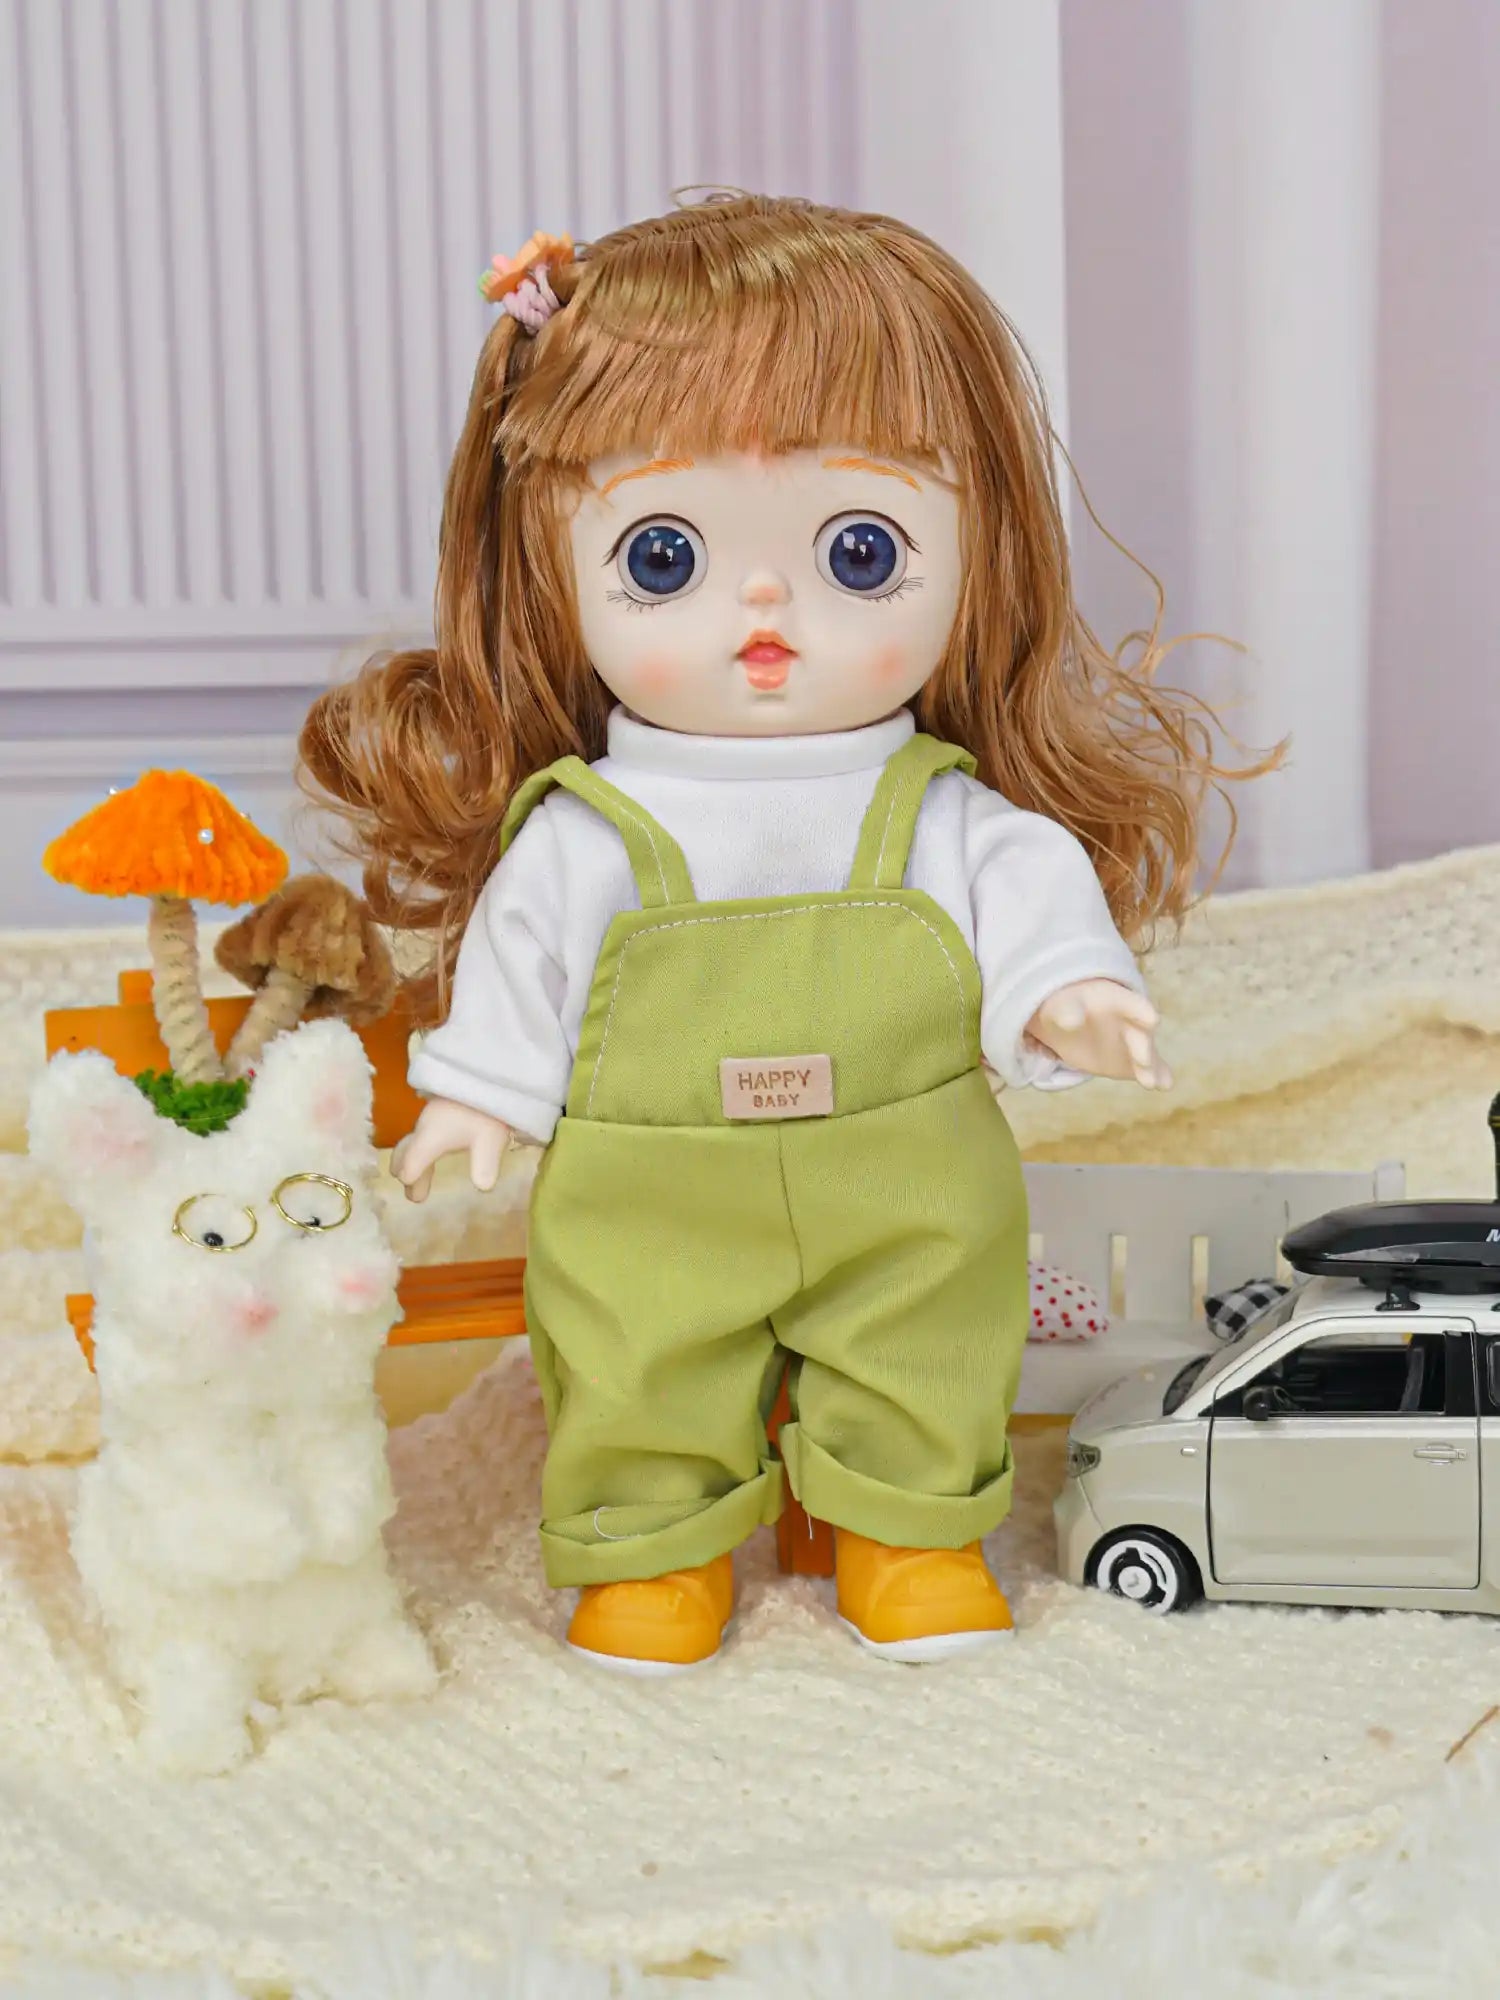 Adorable doll in bright green play overalls, holding her hand out to a cute, bespectacled plush toy.